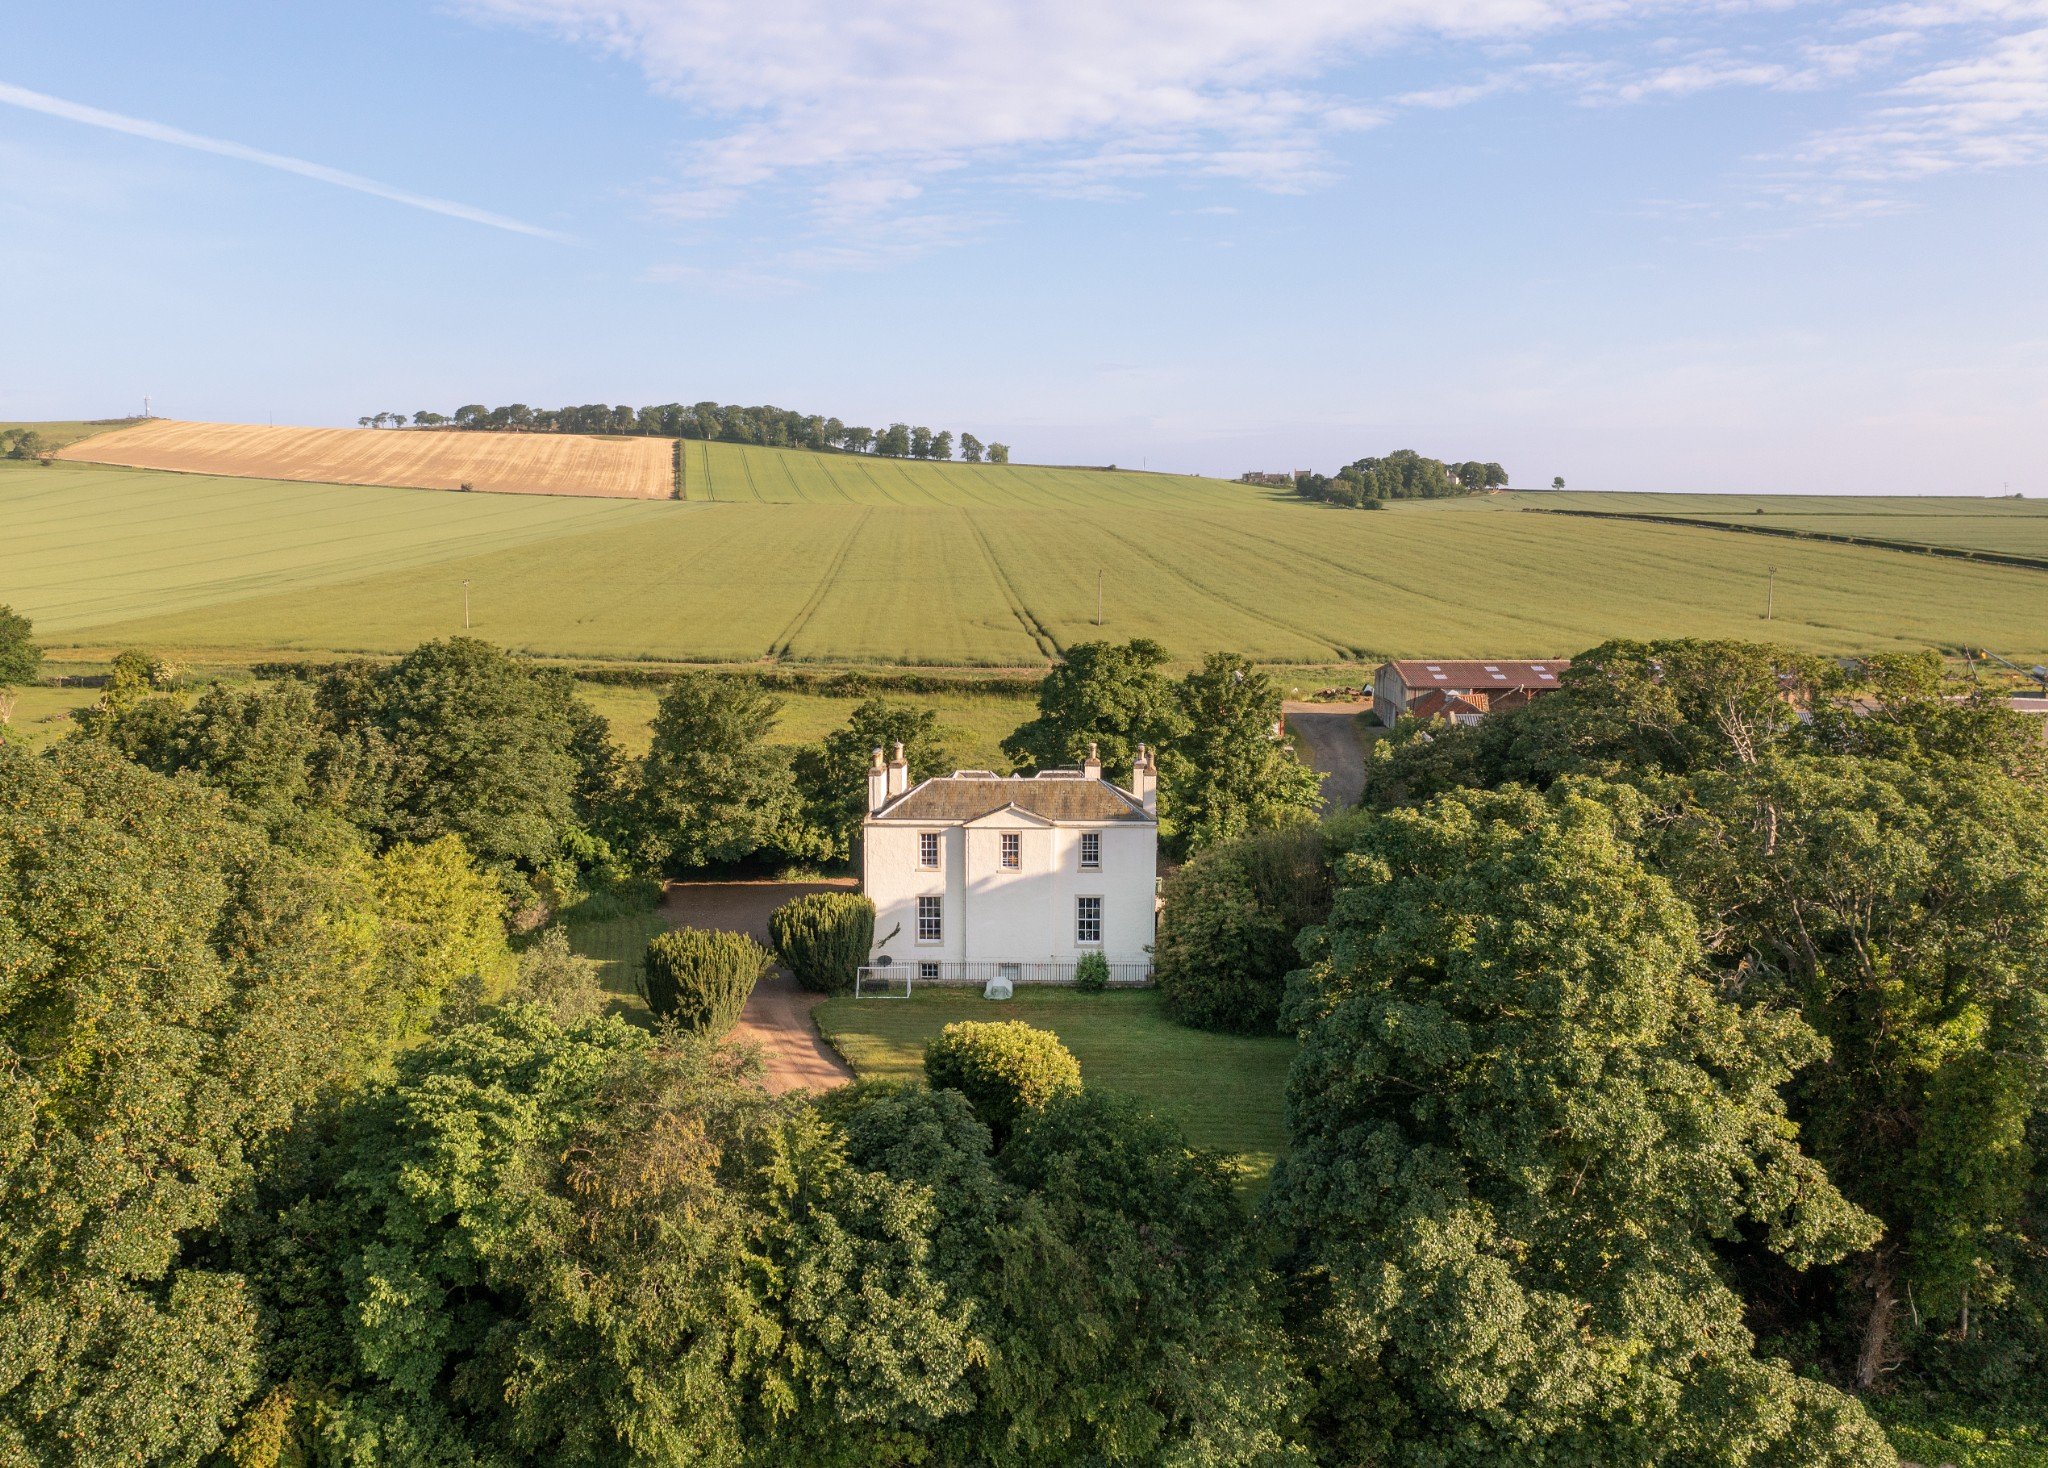 Country detached house surrounded by open fields